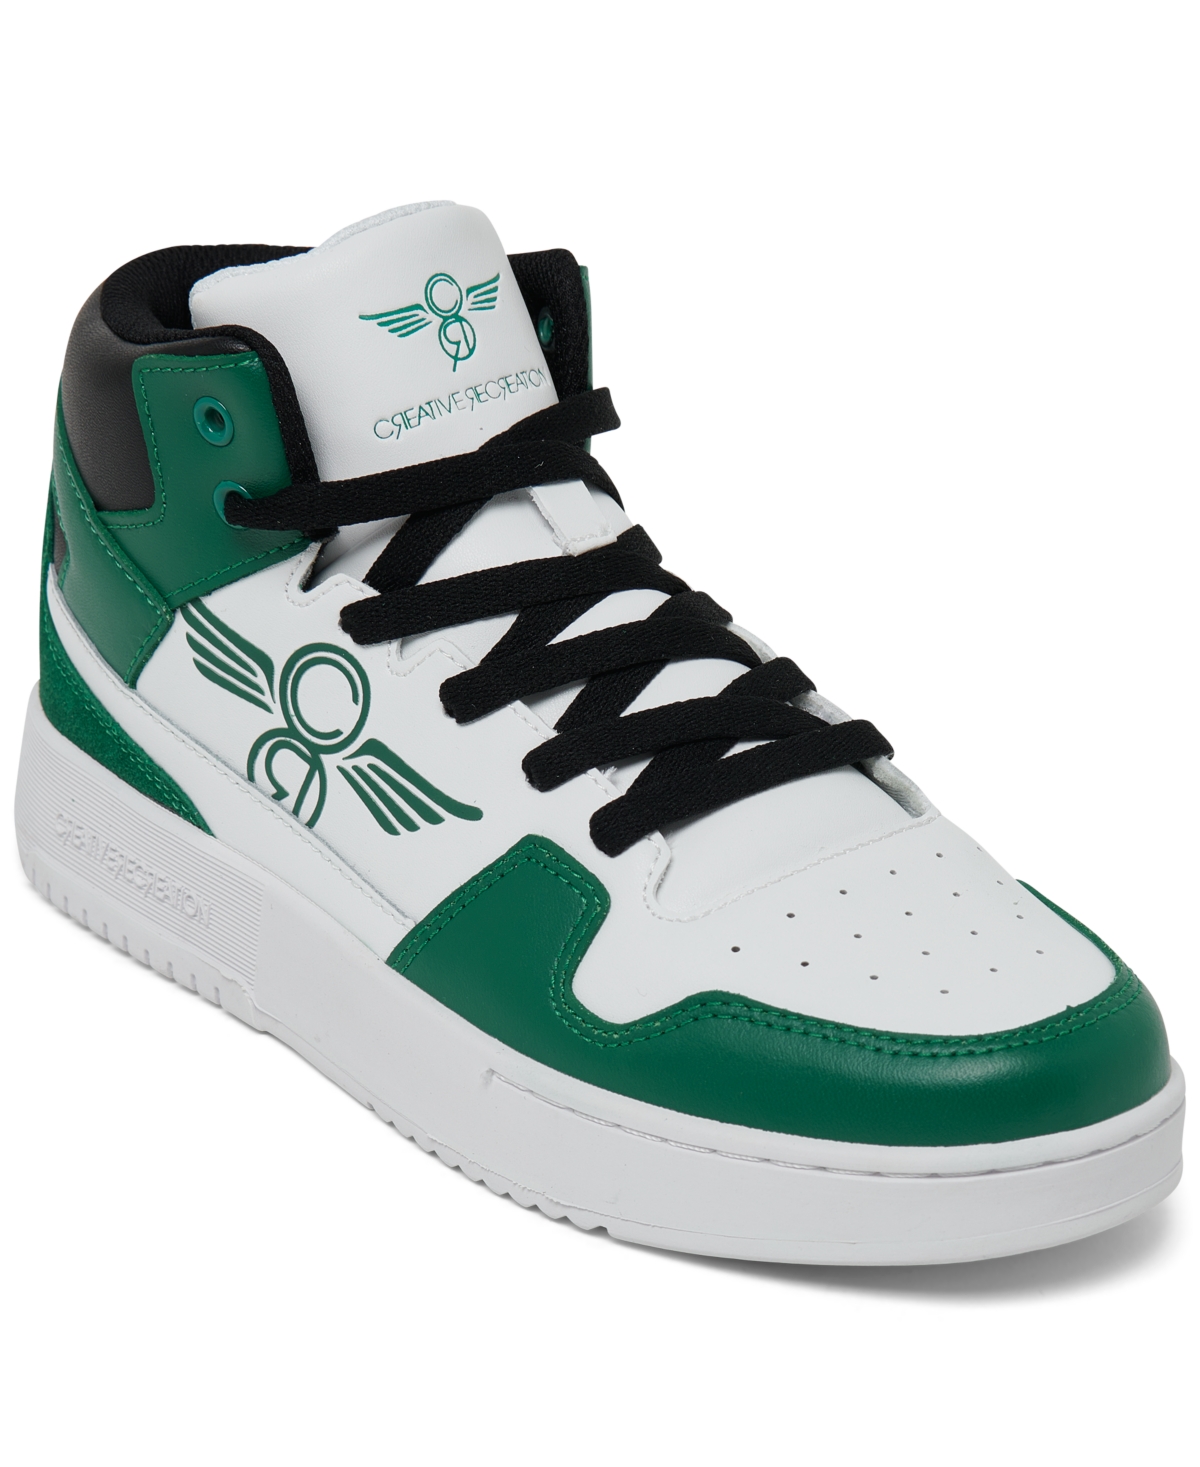 Women's Honey Mid Casual Sneakers from Finish Line - White, Black, Green